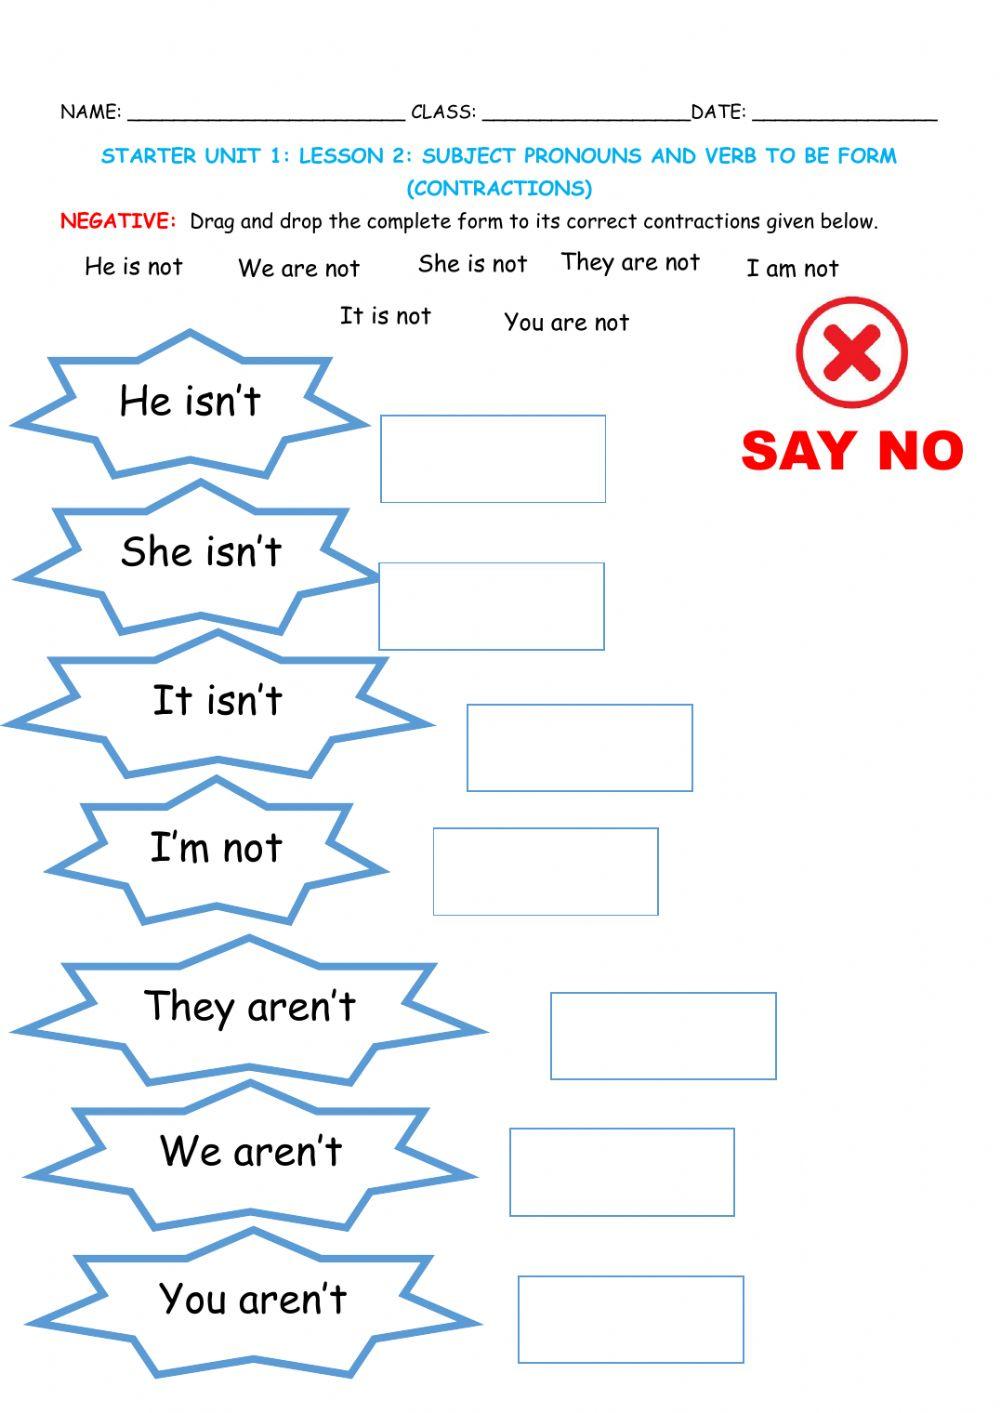 Starter unit 1: subject pronouns and contractions